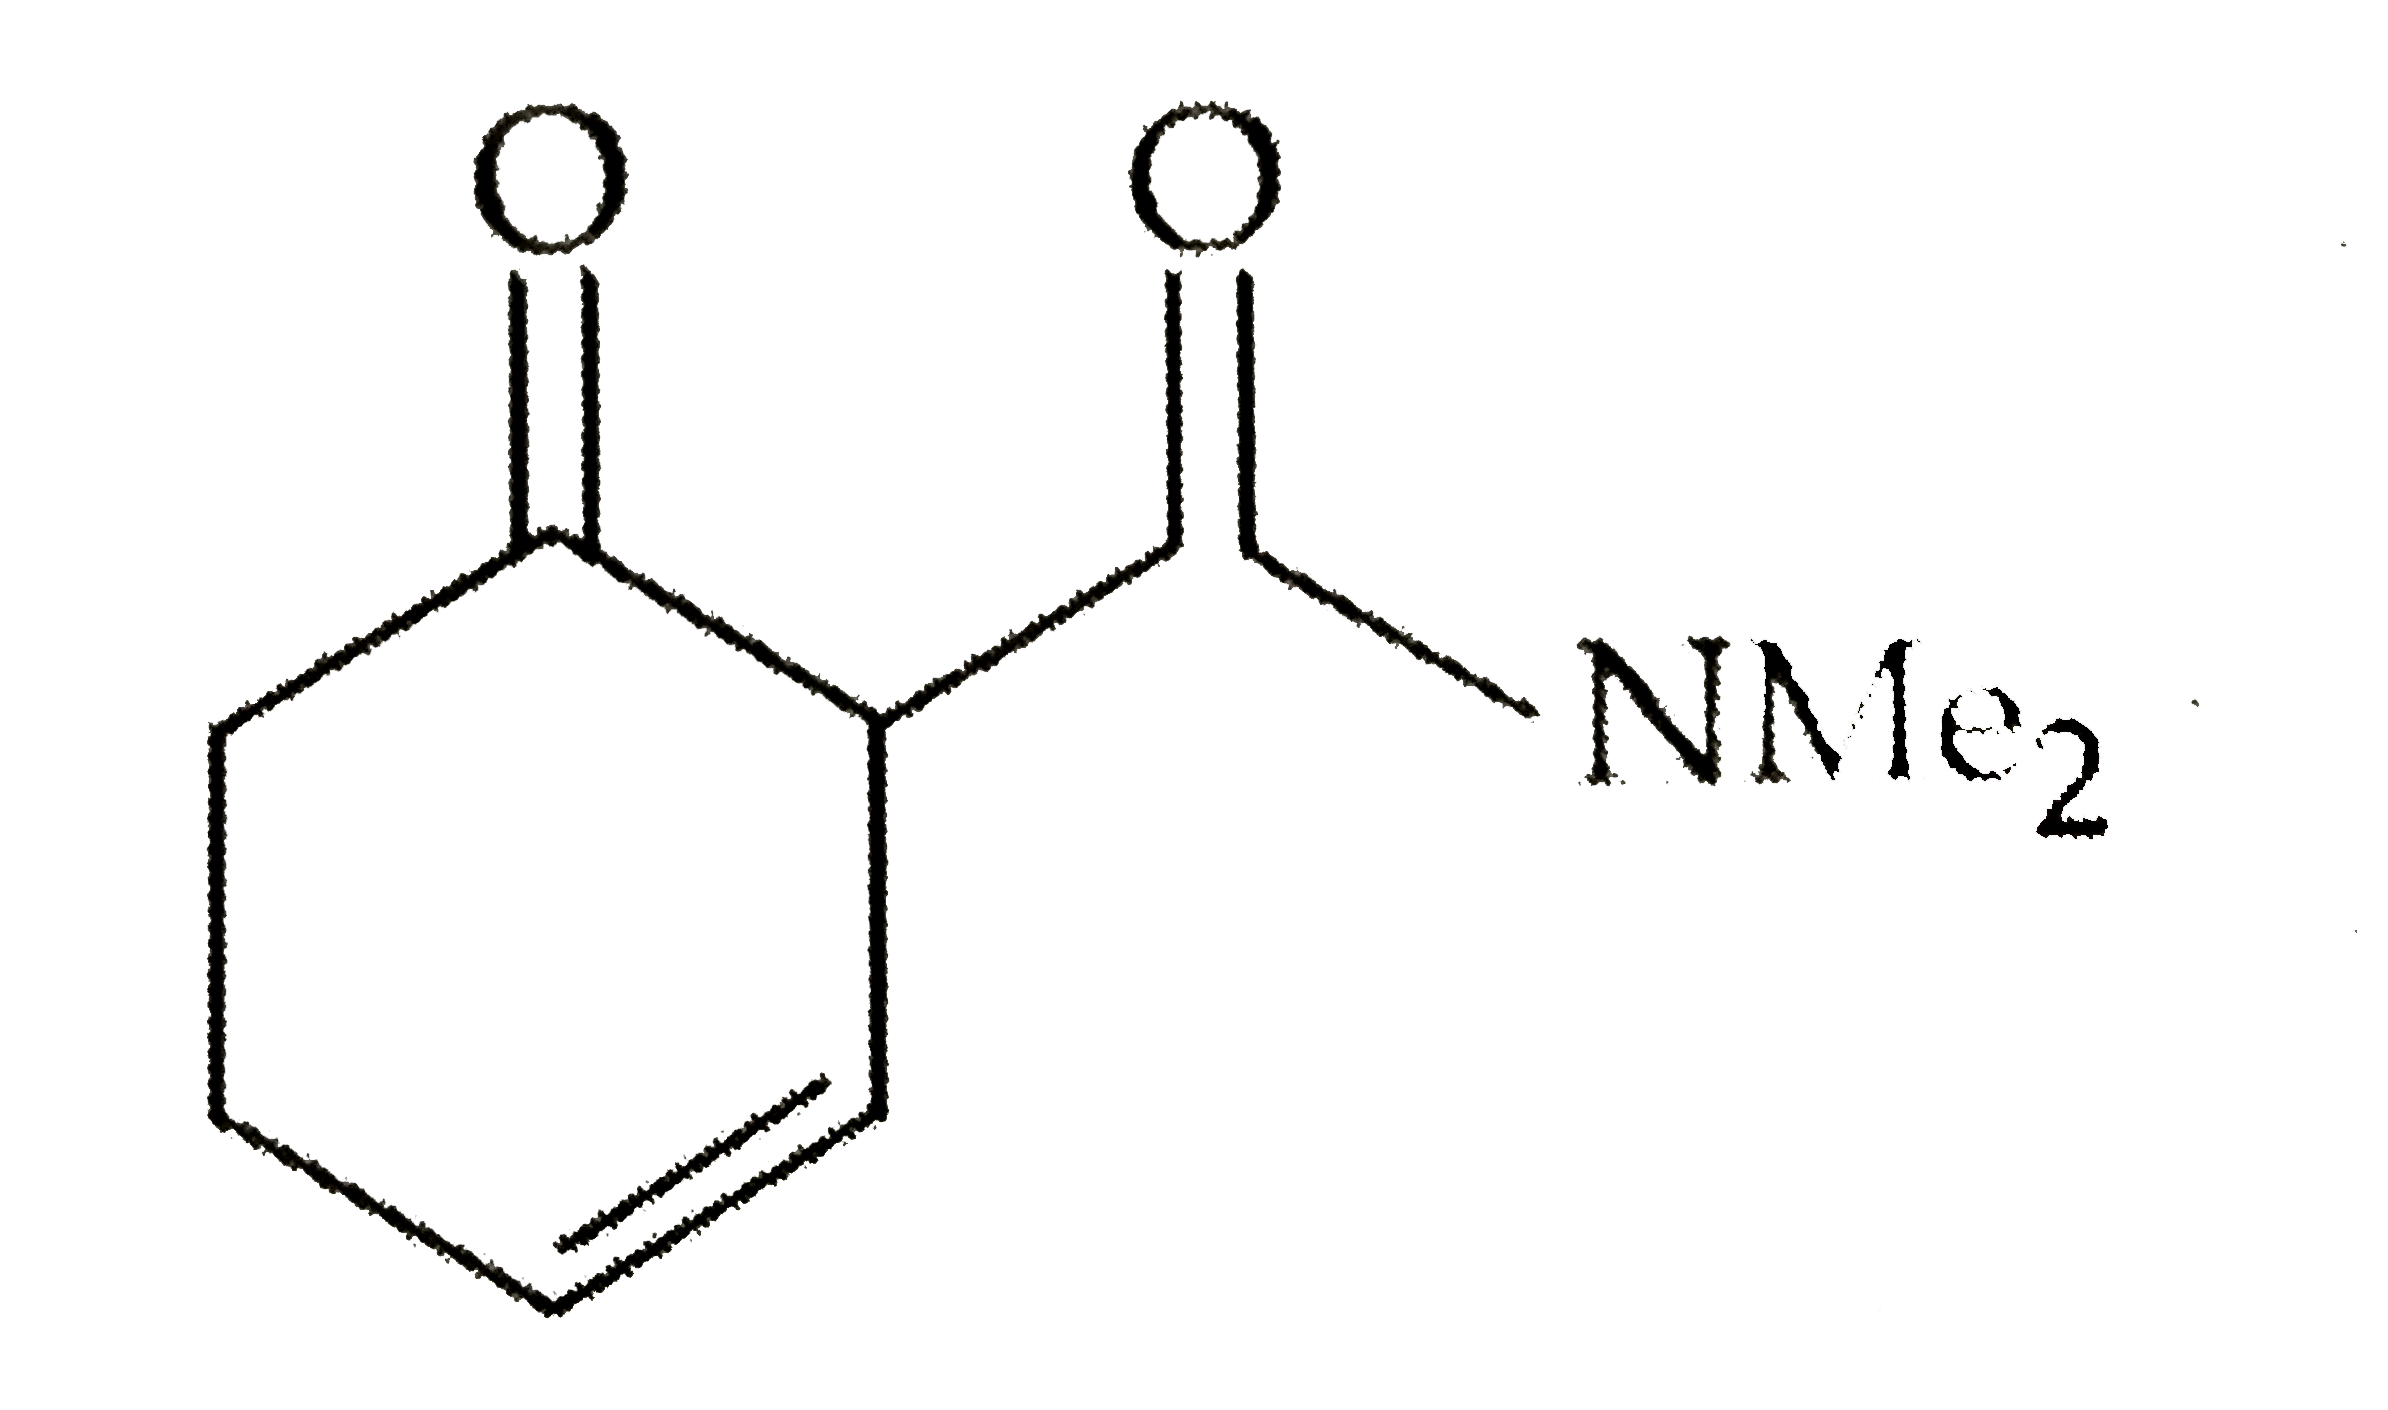 The main reduction product of the following compound with NaBH(4) in methanol is :